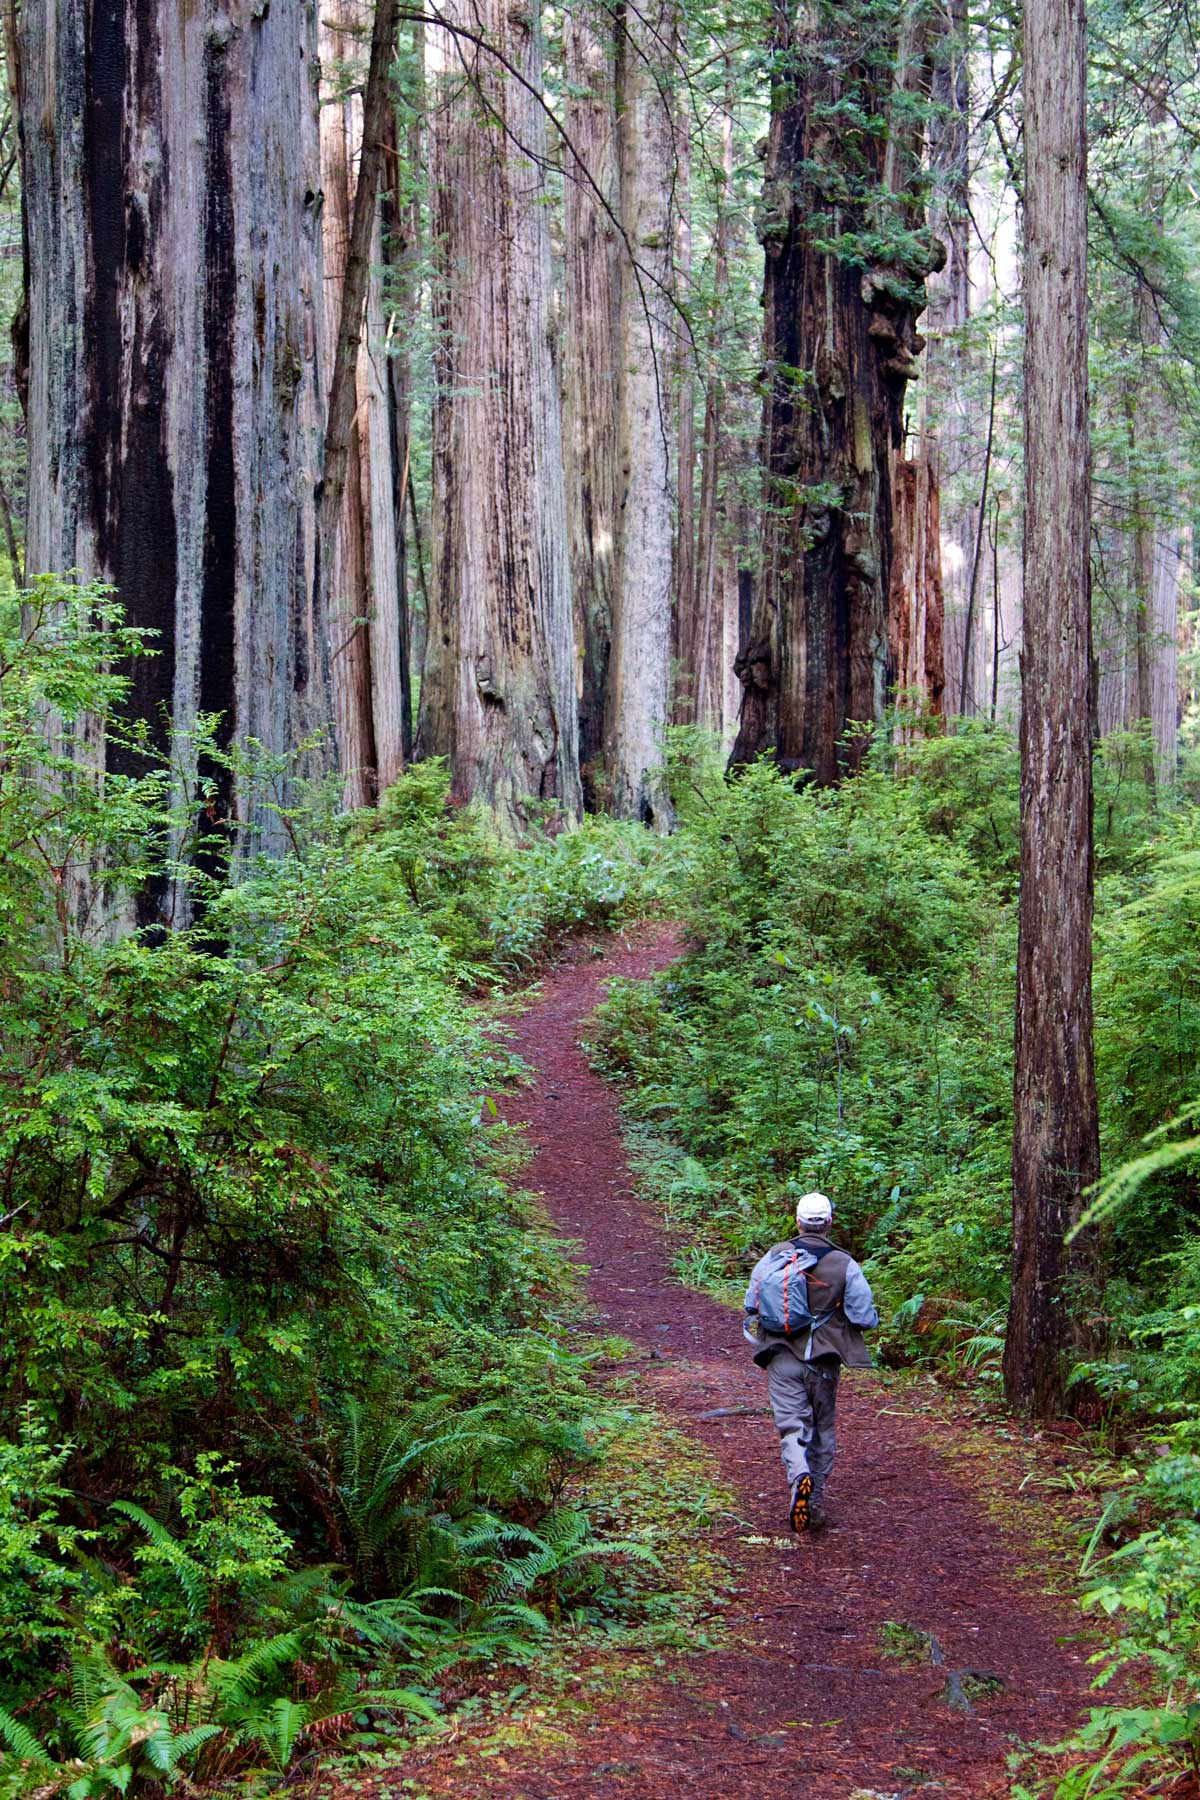 A man walks away from the camera down a path deeper into the redwood forest.